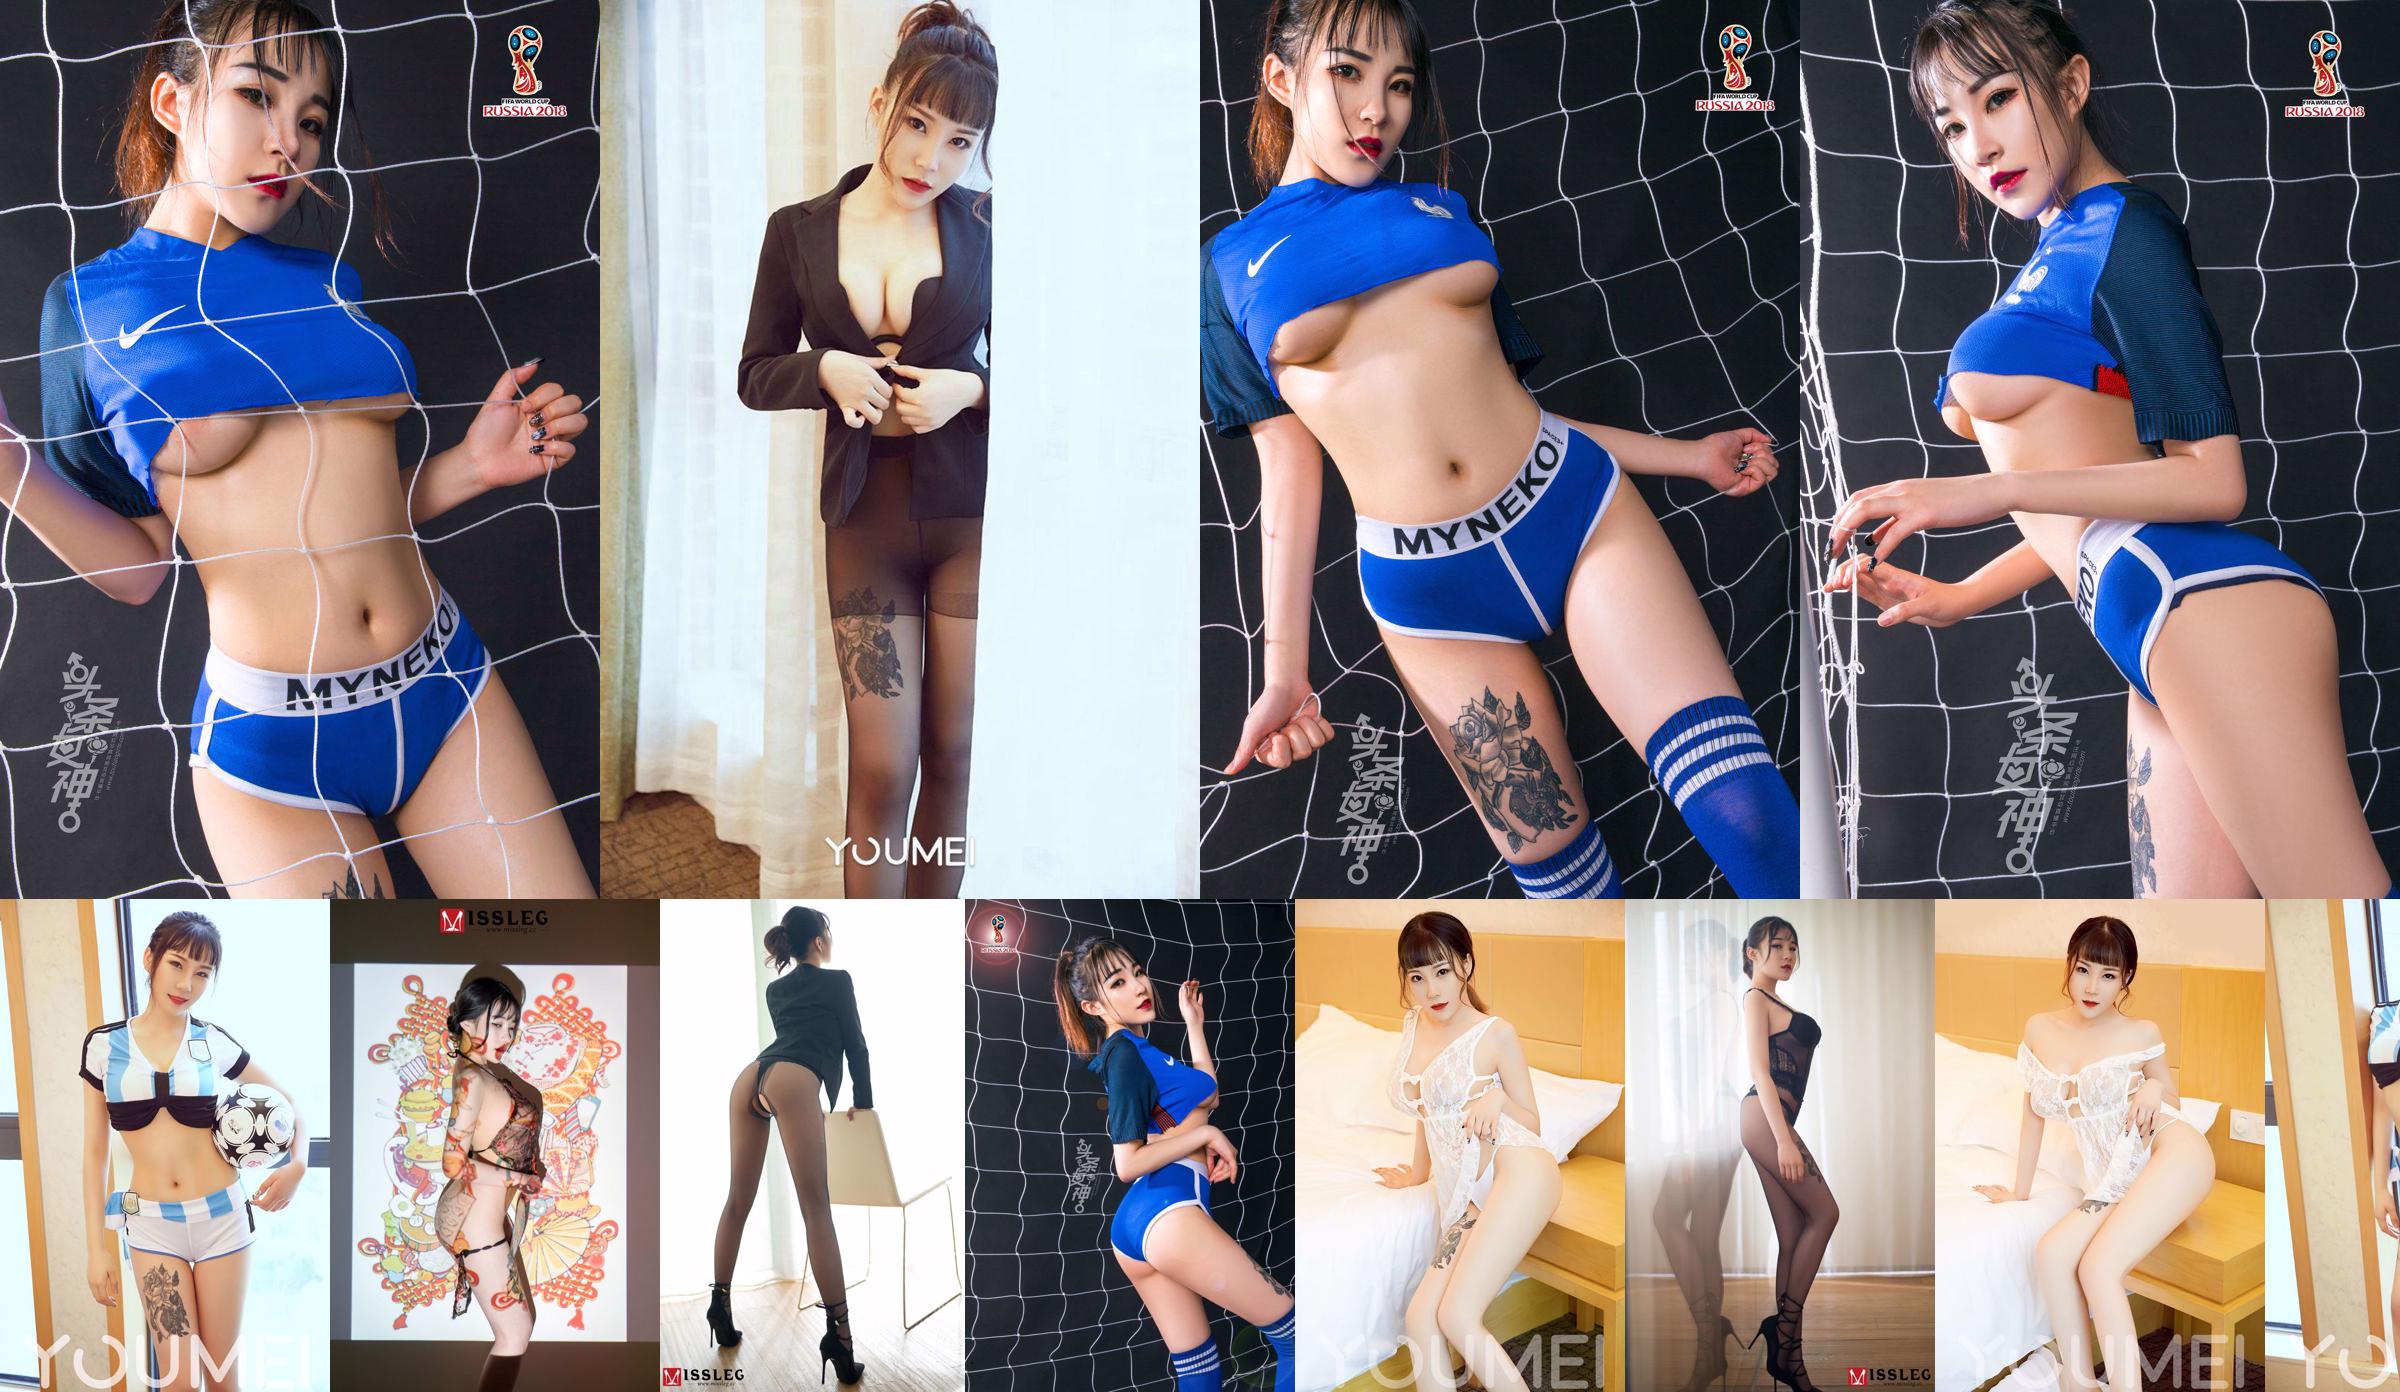 [IESS 奇思趣向] Model: Newcomer "Girls Who Love Laughter" No.4940e4 Page 3